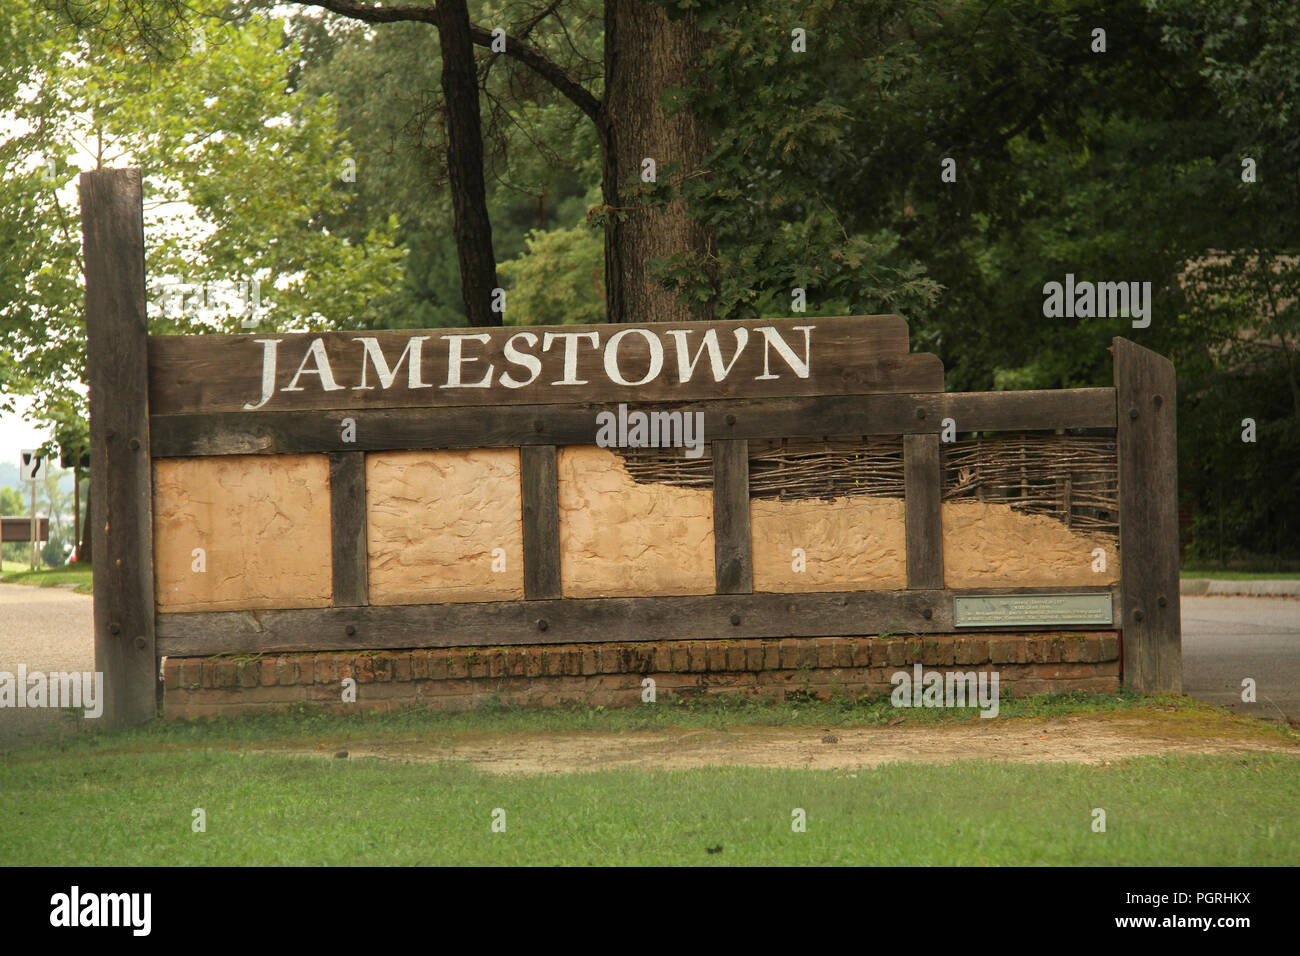 Jamestown Va Usa Entrance To The Historical Jamestown First Permanent English Settlement In The Americas Stock Photo Alamy